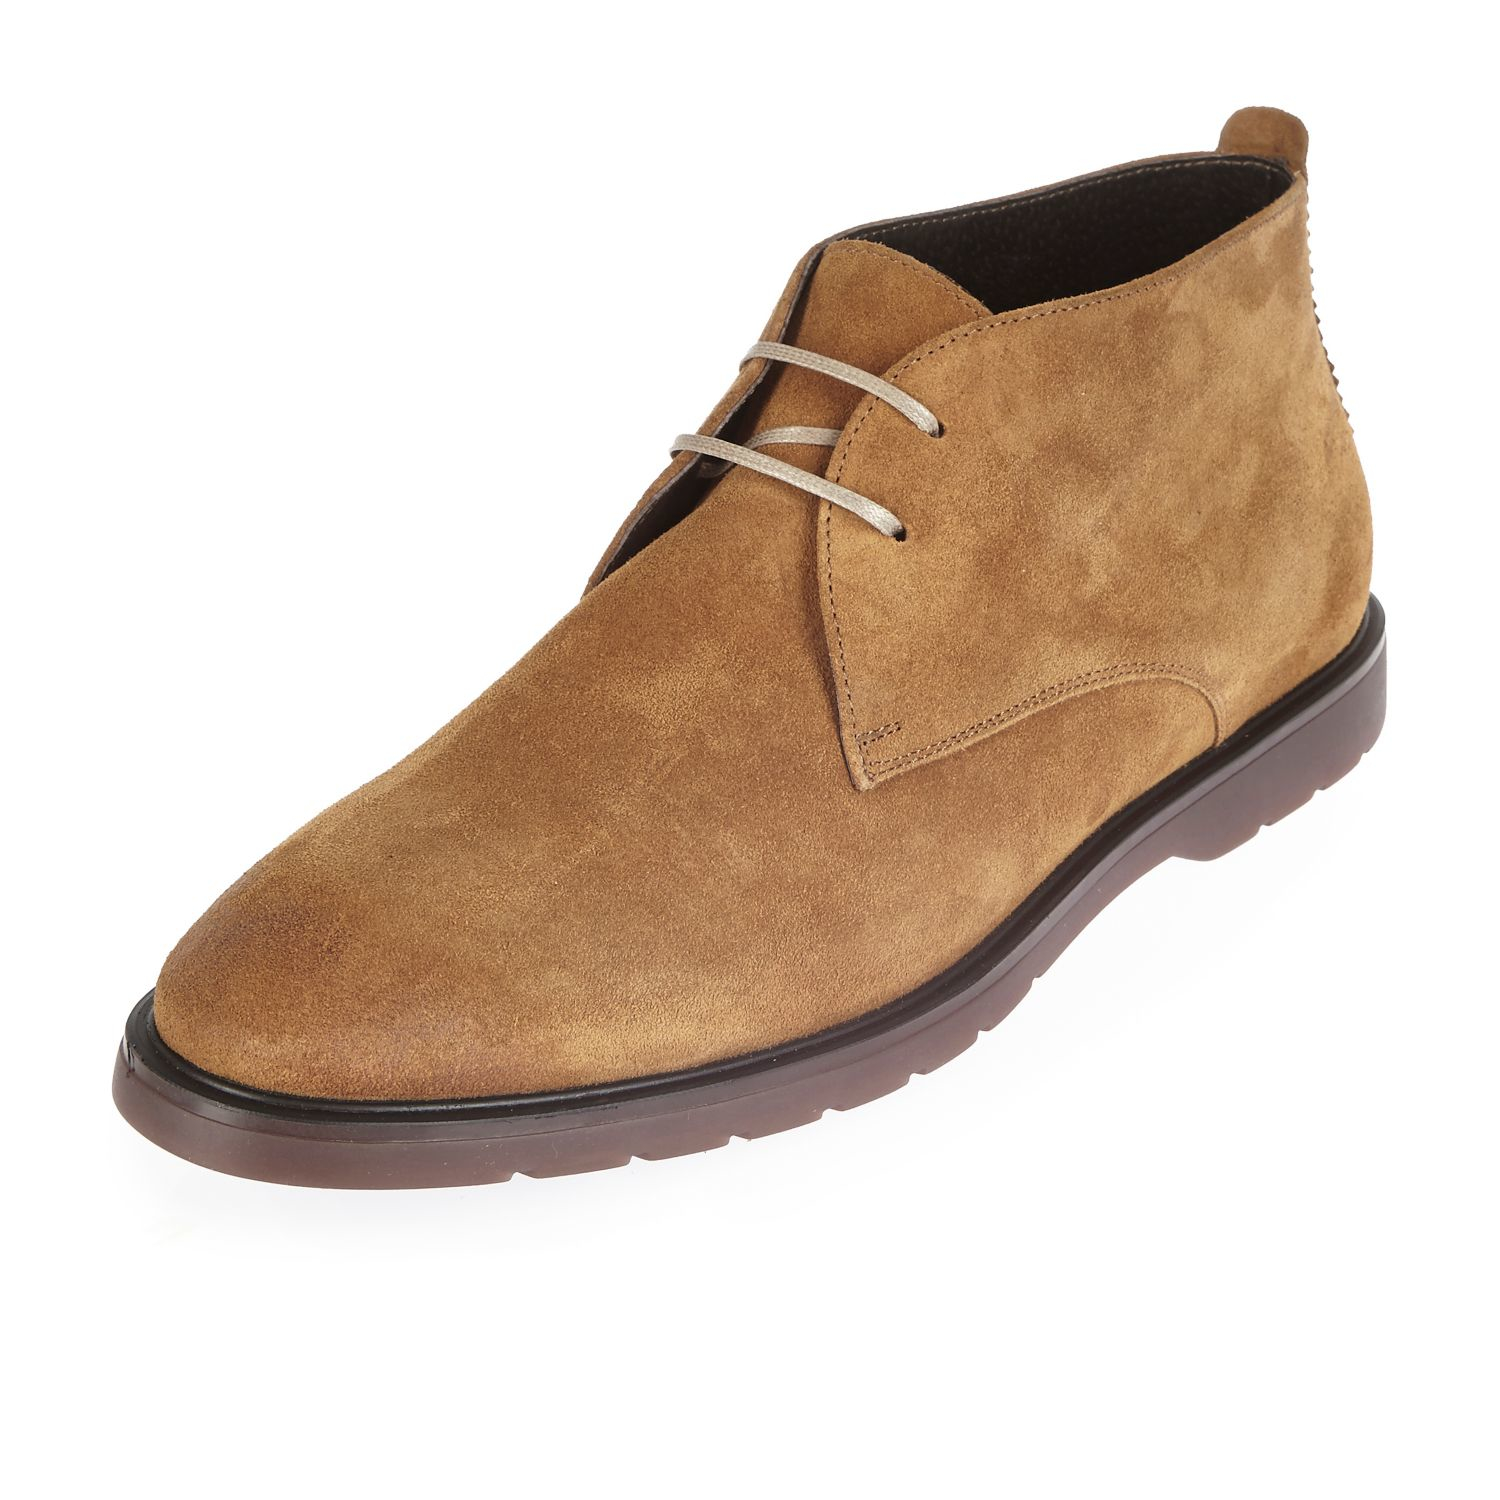 Lyst - River Island Brown Italian Leather Chukka Boots in Brown for Men